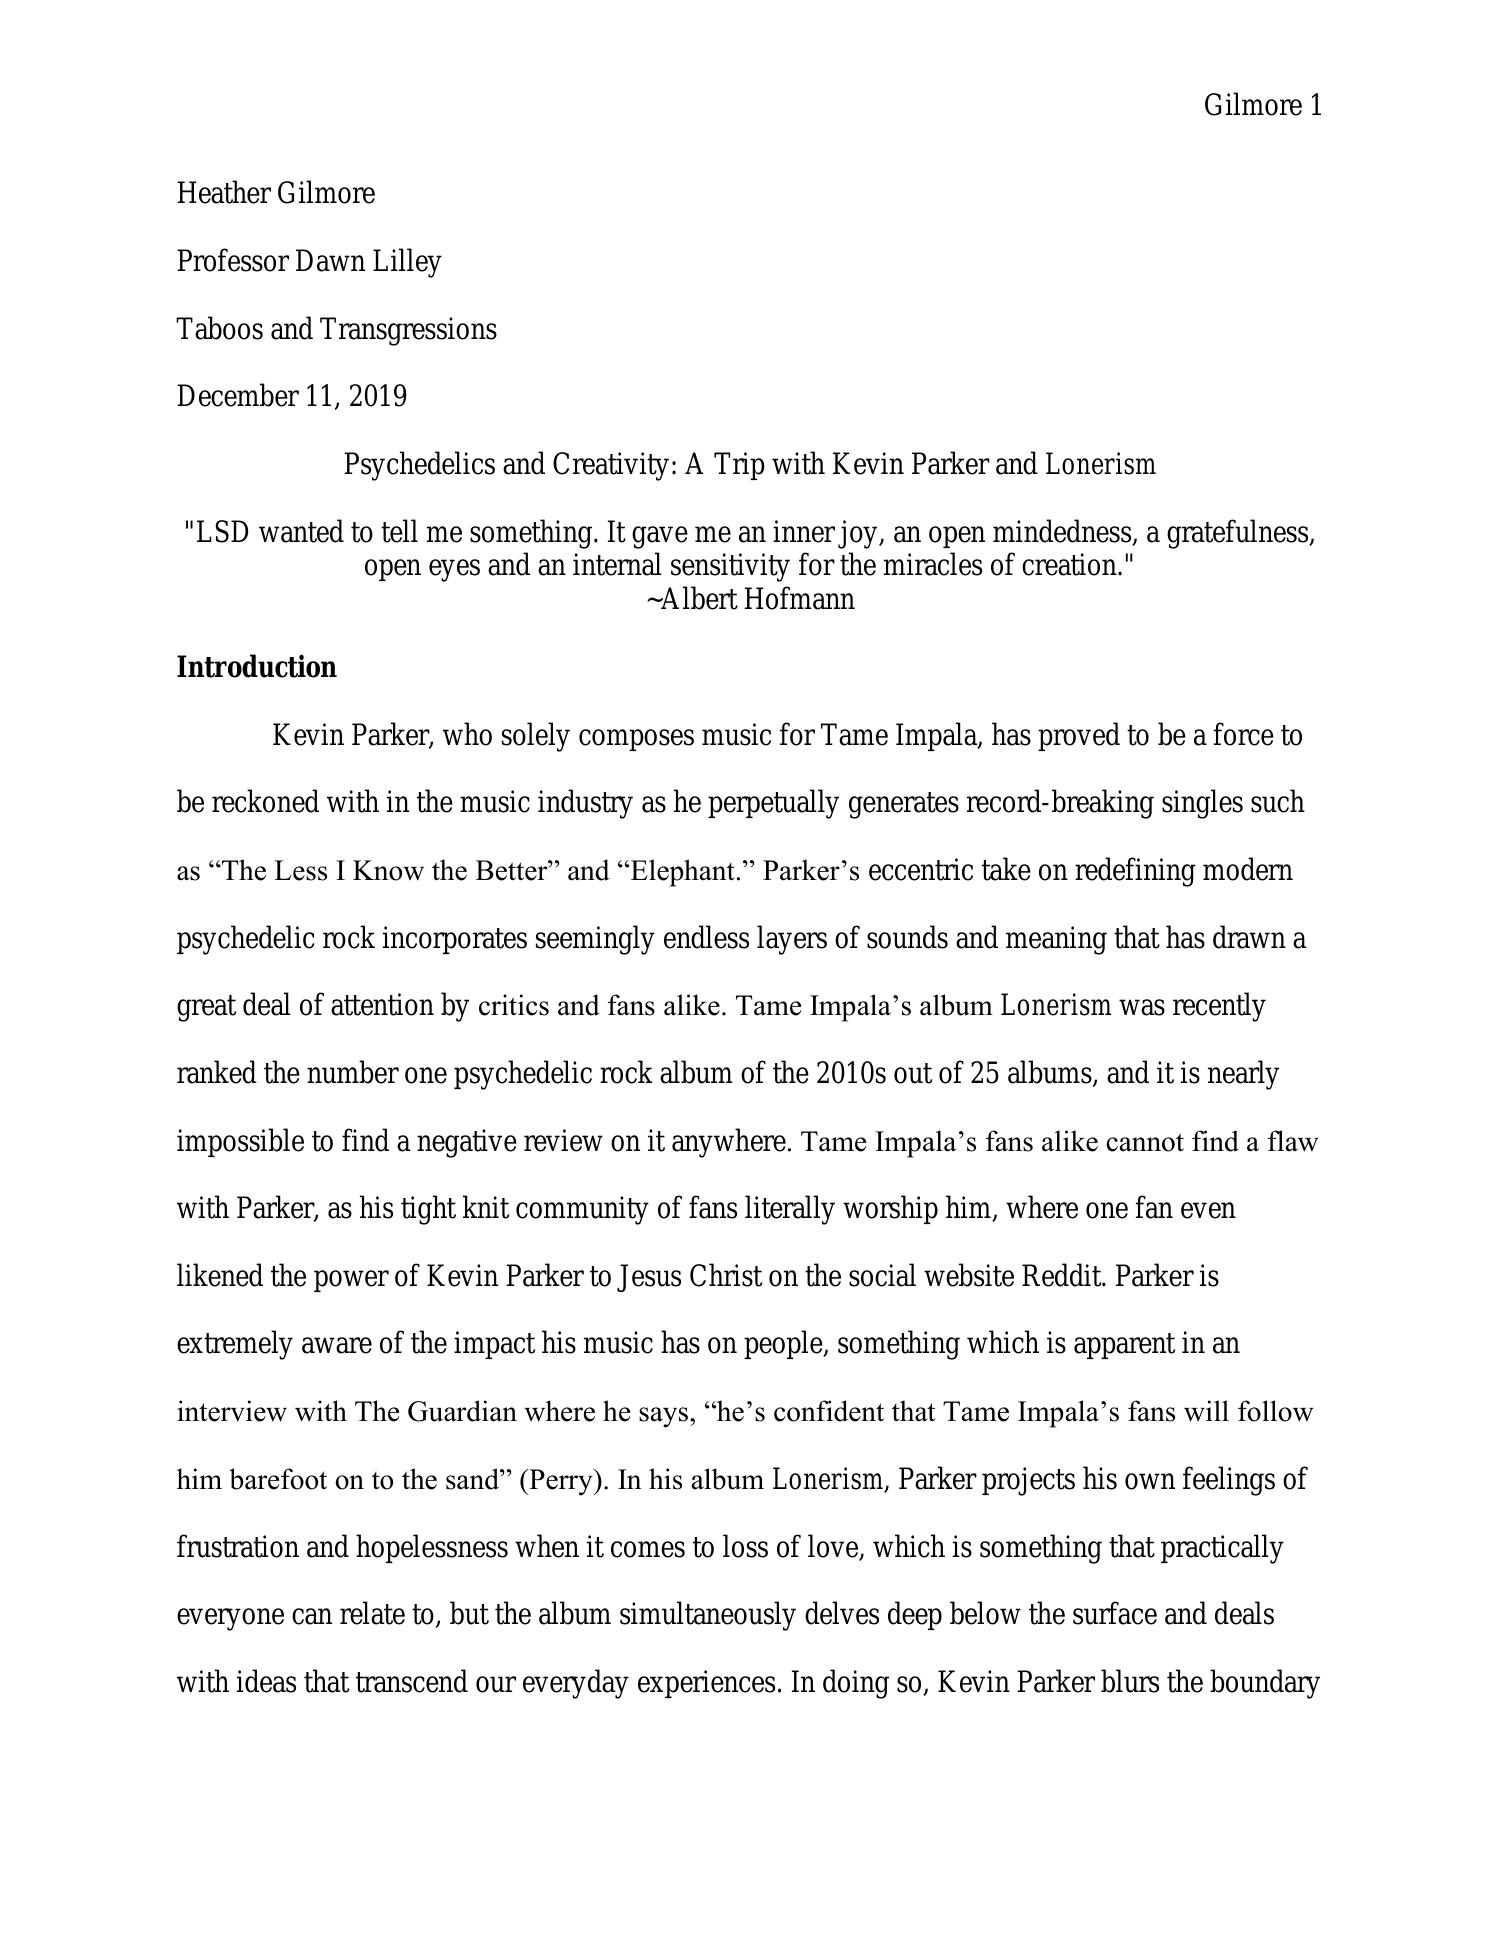 research paper sample docx